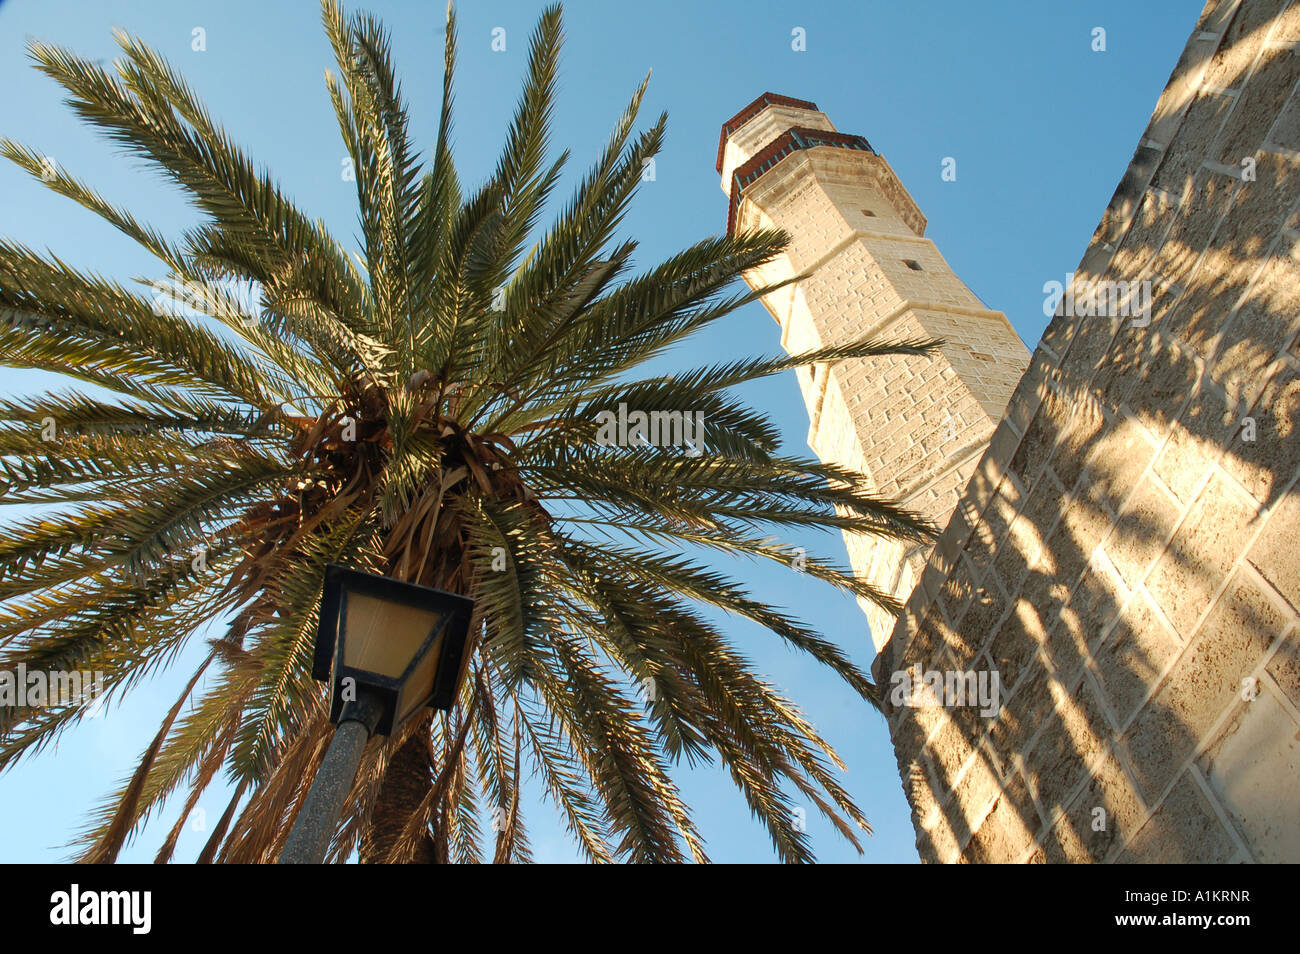 Israel Tel Aviv Jaffa Muhamidiya mosque great mosque is situated Between Yefet Street Olei Tzion and the sea Stock Photo